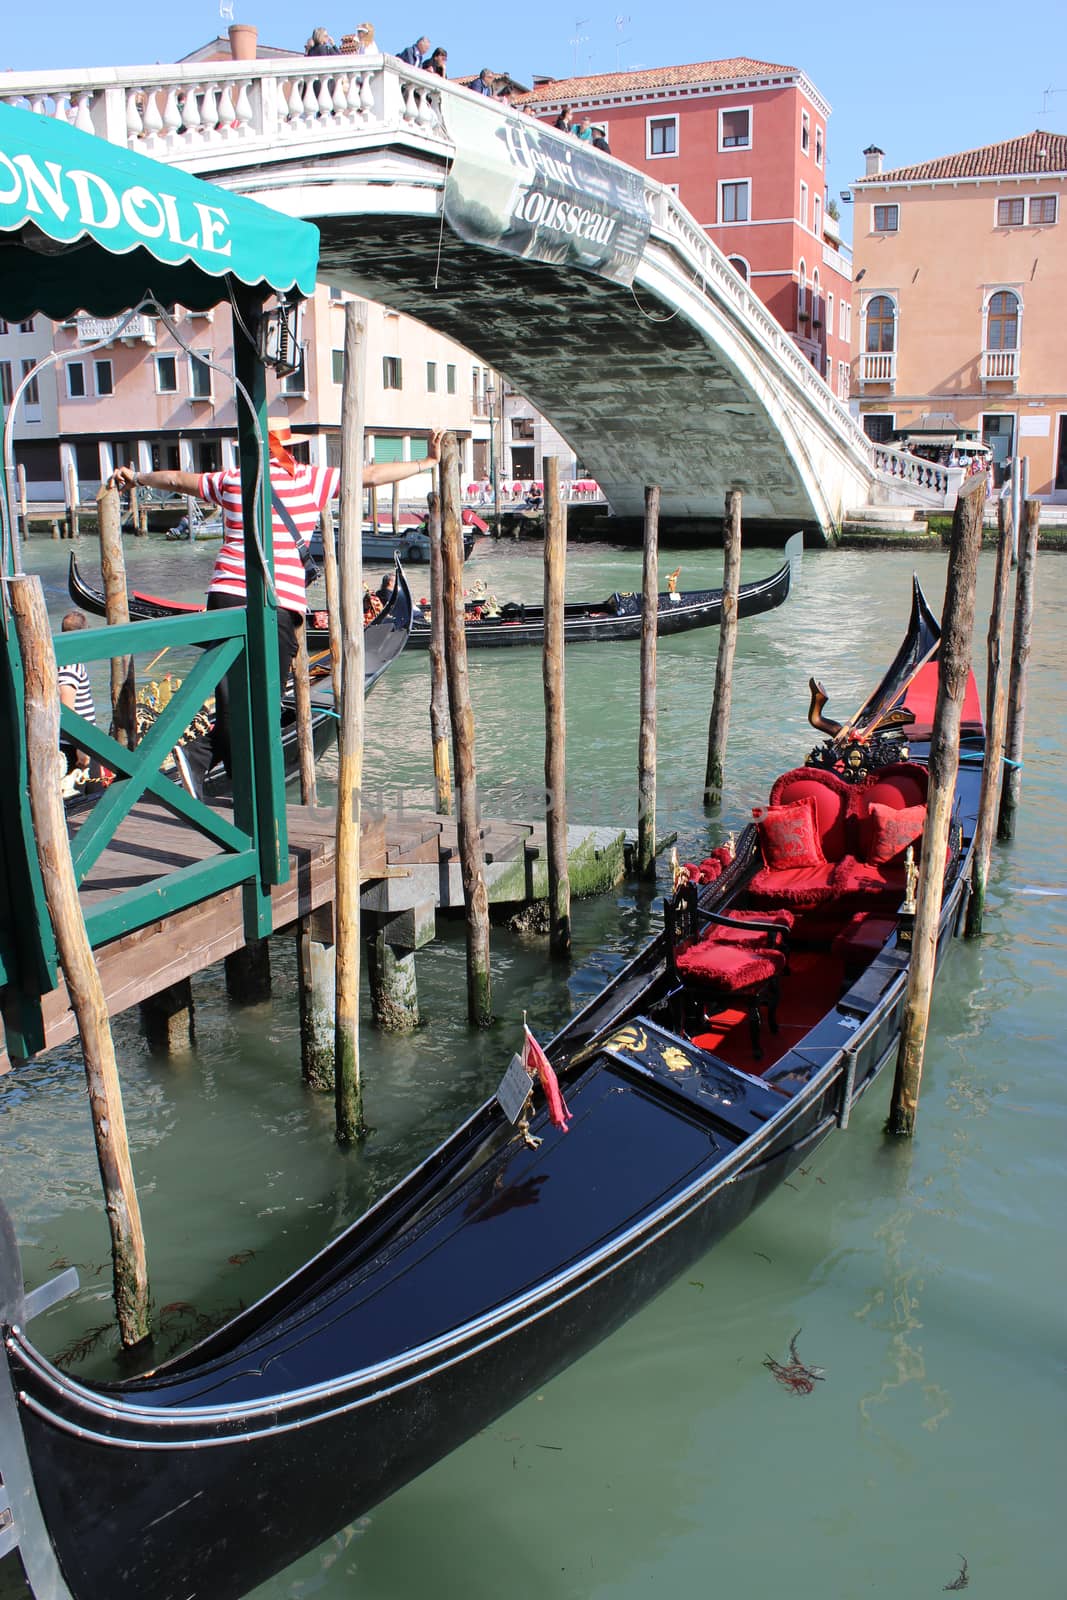 Gondolas and gondoliers on the Grand Canal in Venice, Italy by bensib